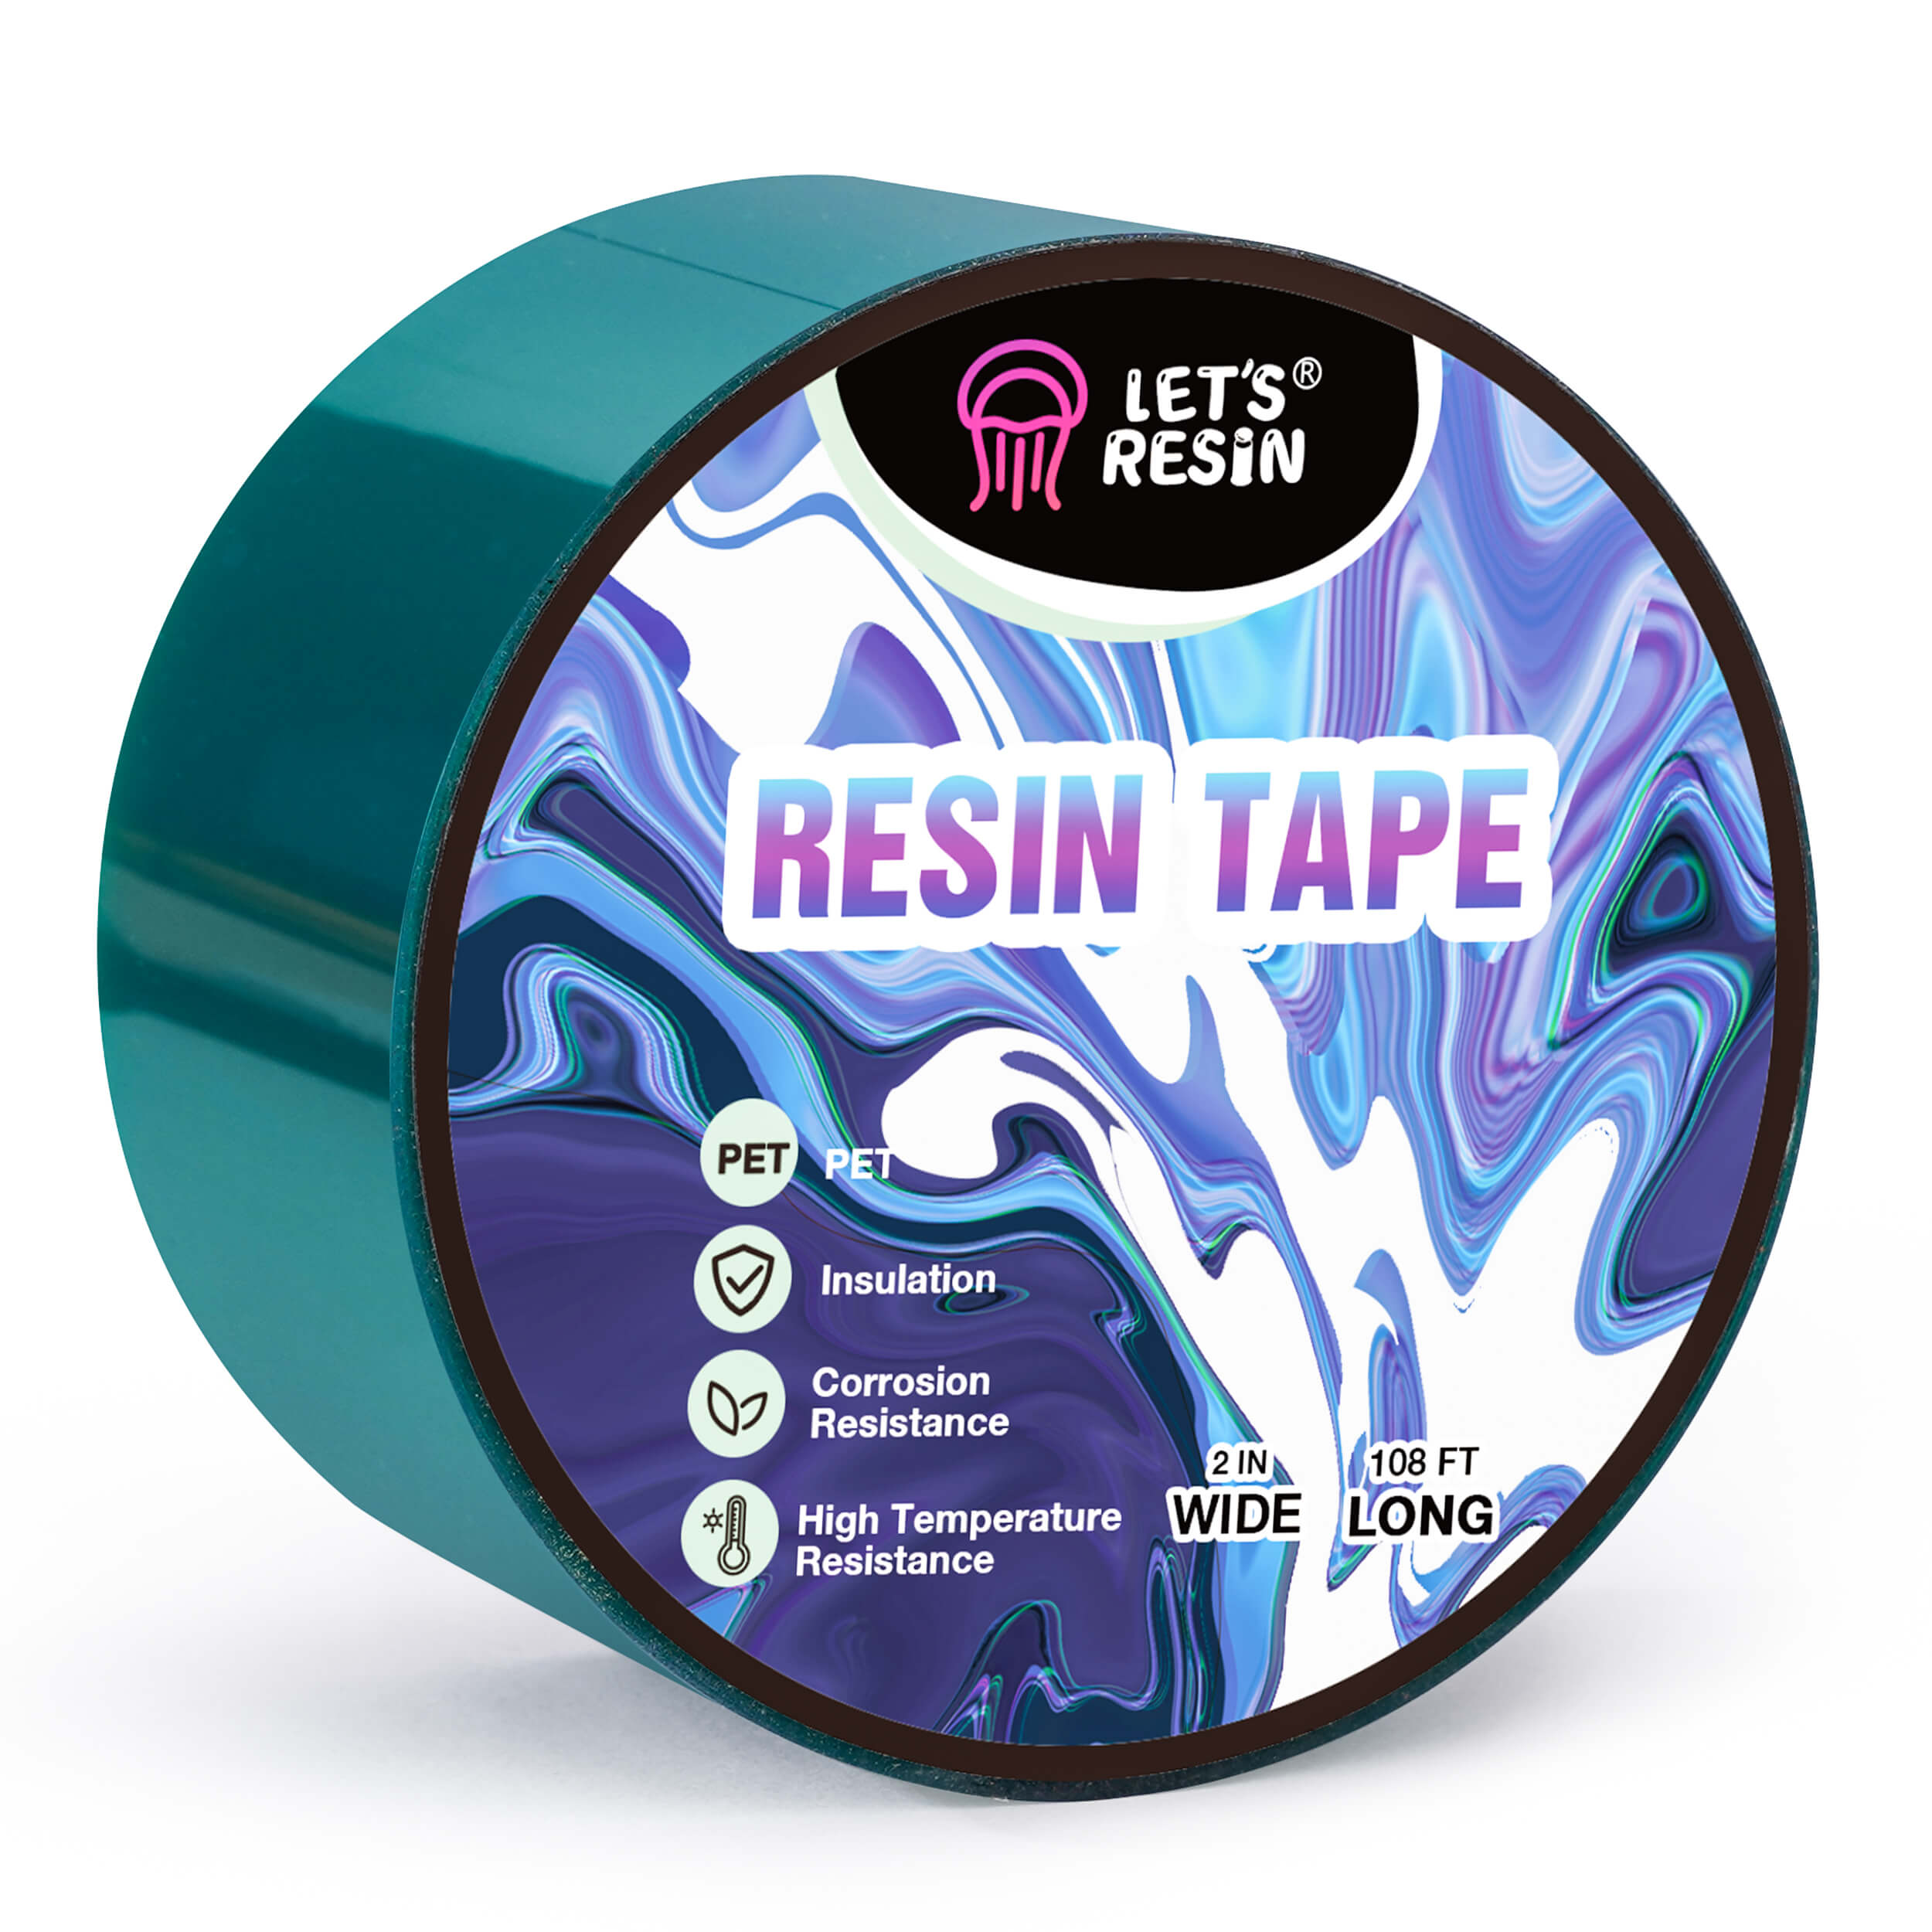 MISSYOUNG Resin Tape for Epoxy Resin Molding, Thermal Adhesive Tape Green  Polyester HighTempeprature Masking Tape Green High Heat PET Tape for